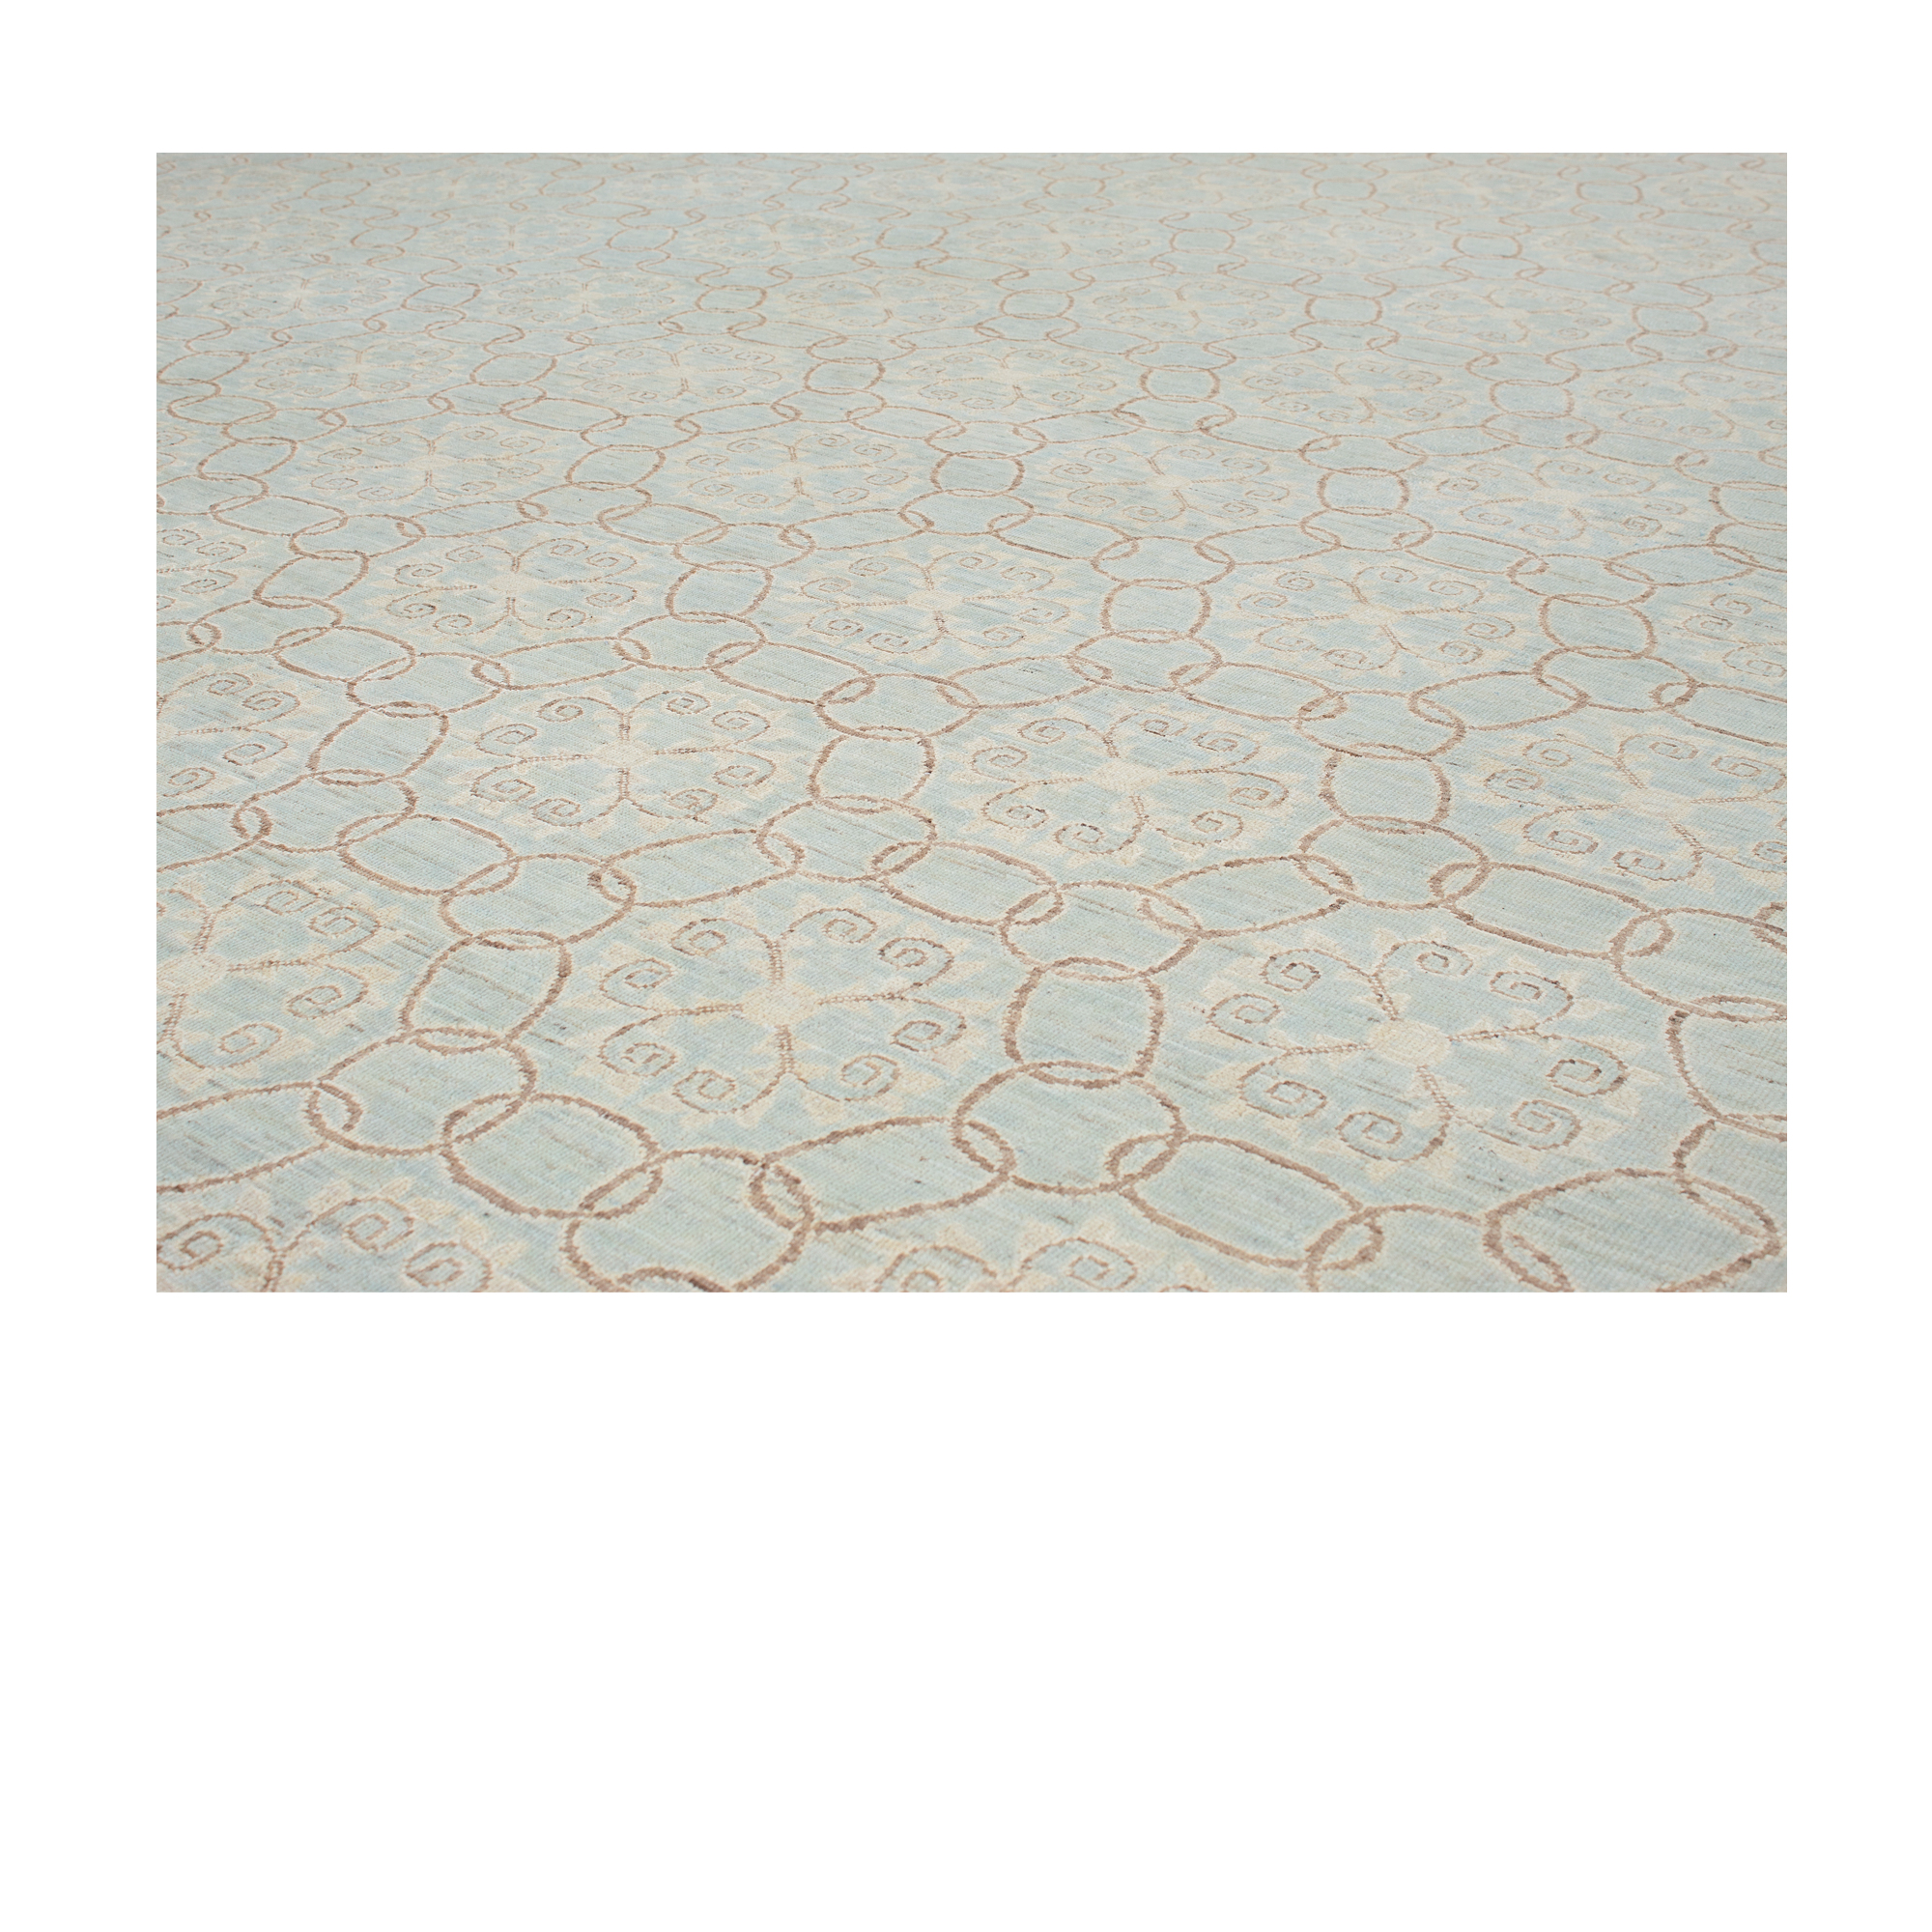 Our Charlotte rug is handknotted from the finest hand-carded, hand-spun, naturally dyed wool.